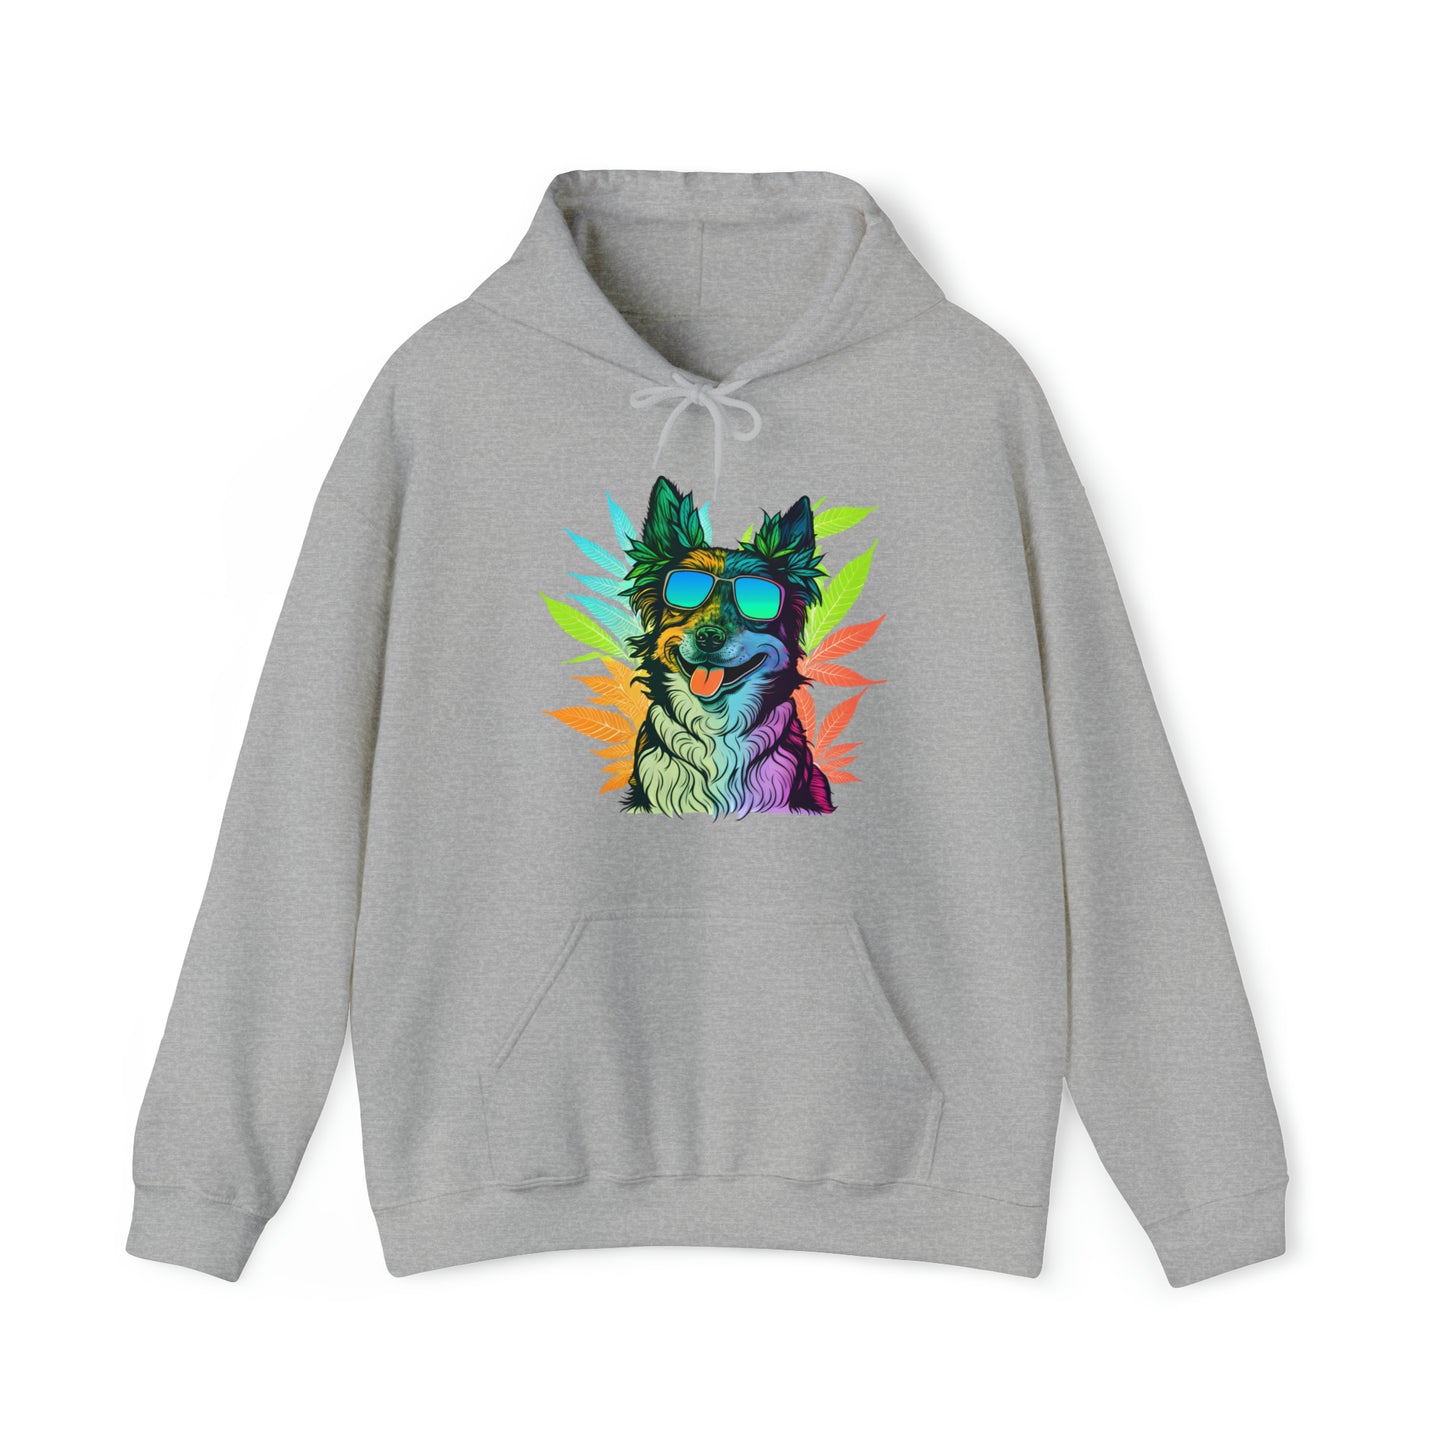 Cool Corgi with Shades and Cannabis Leaves Hoodie